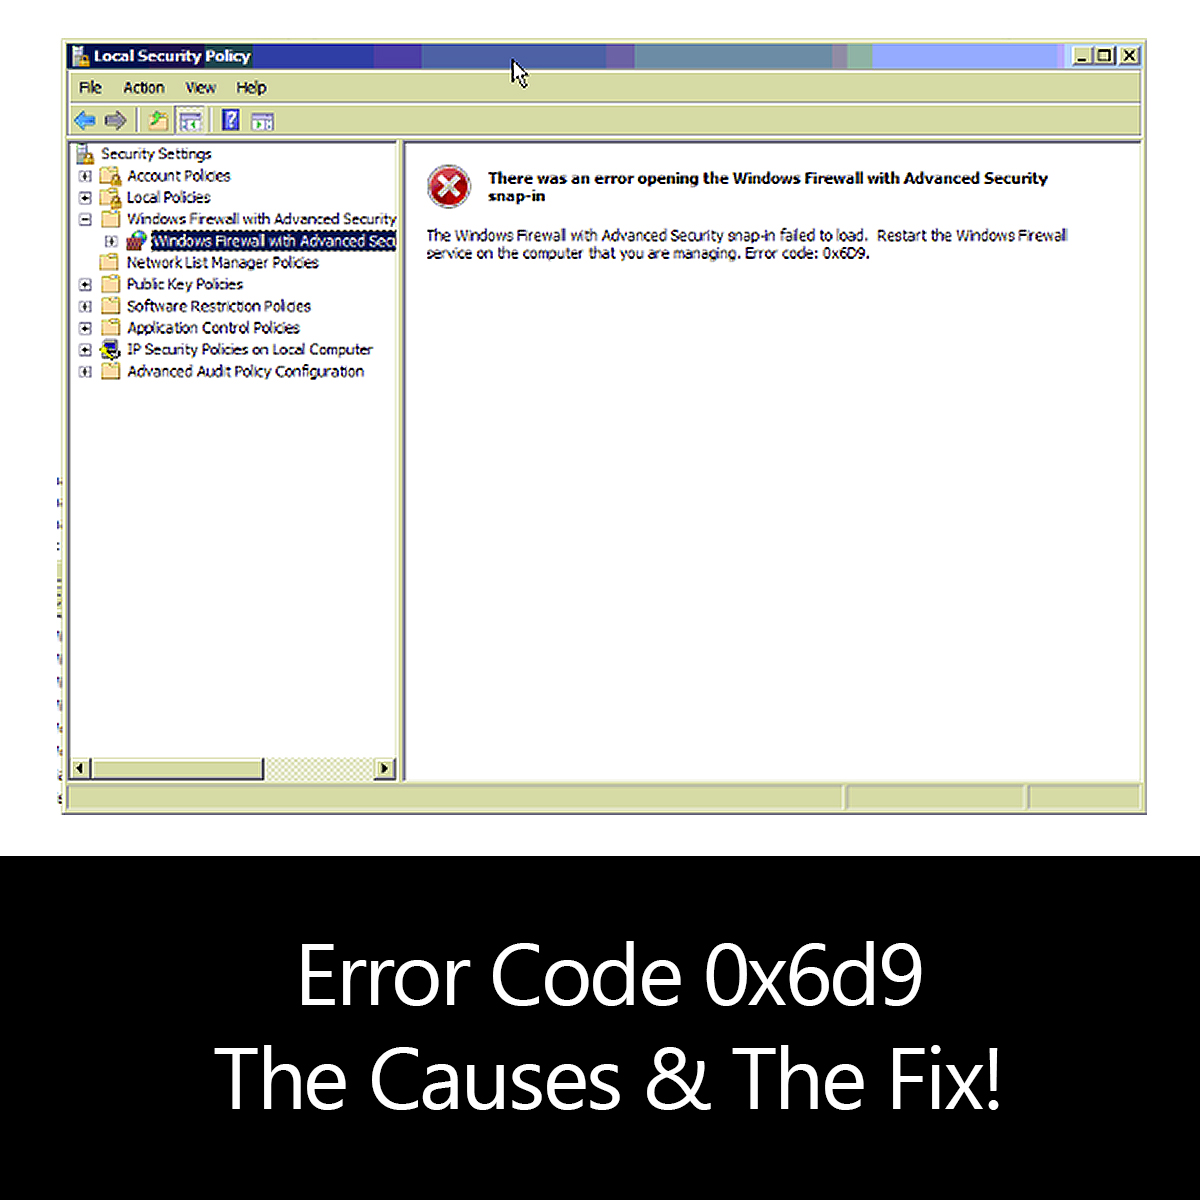 unable to rotate on windows firewall error way 0x6d9